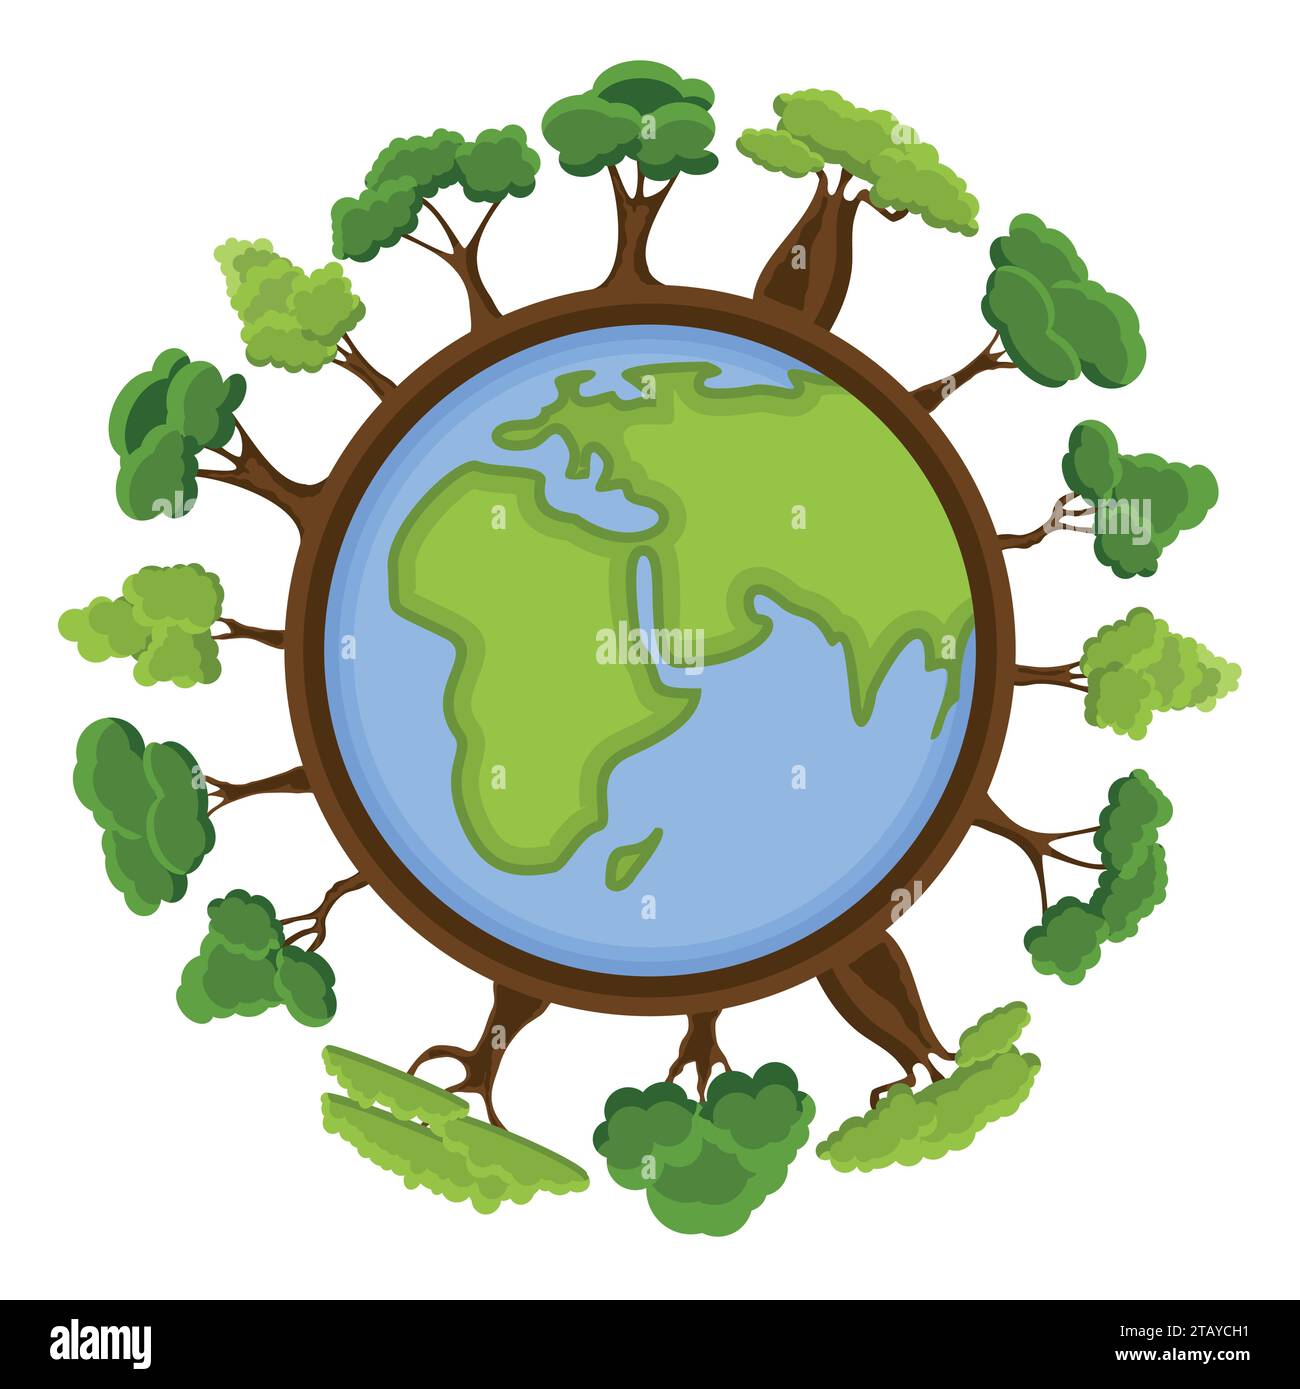 Ecology concept with green Eco Earth and trees. Cartoon earth planet globe with environment elements around. Eco friendly vector illustration. Stock Vector